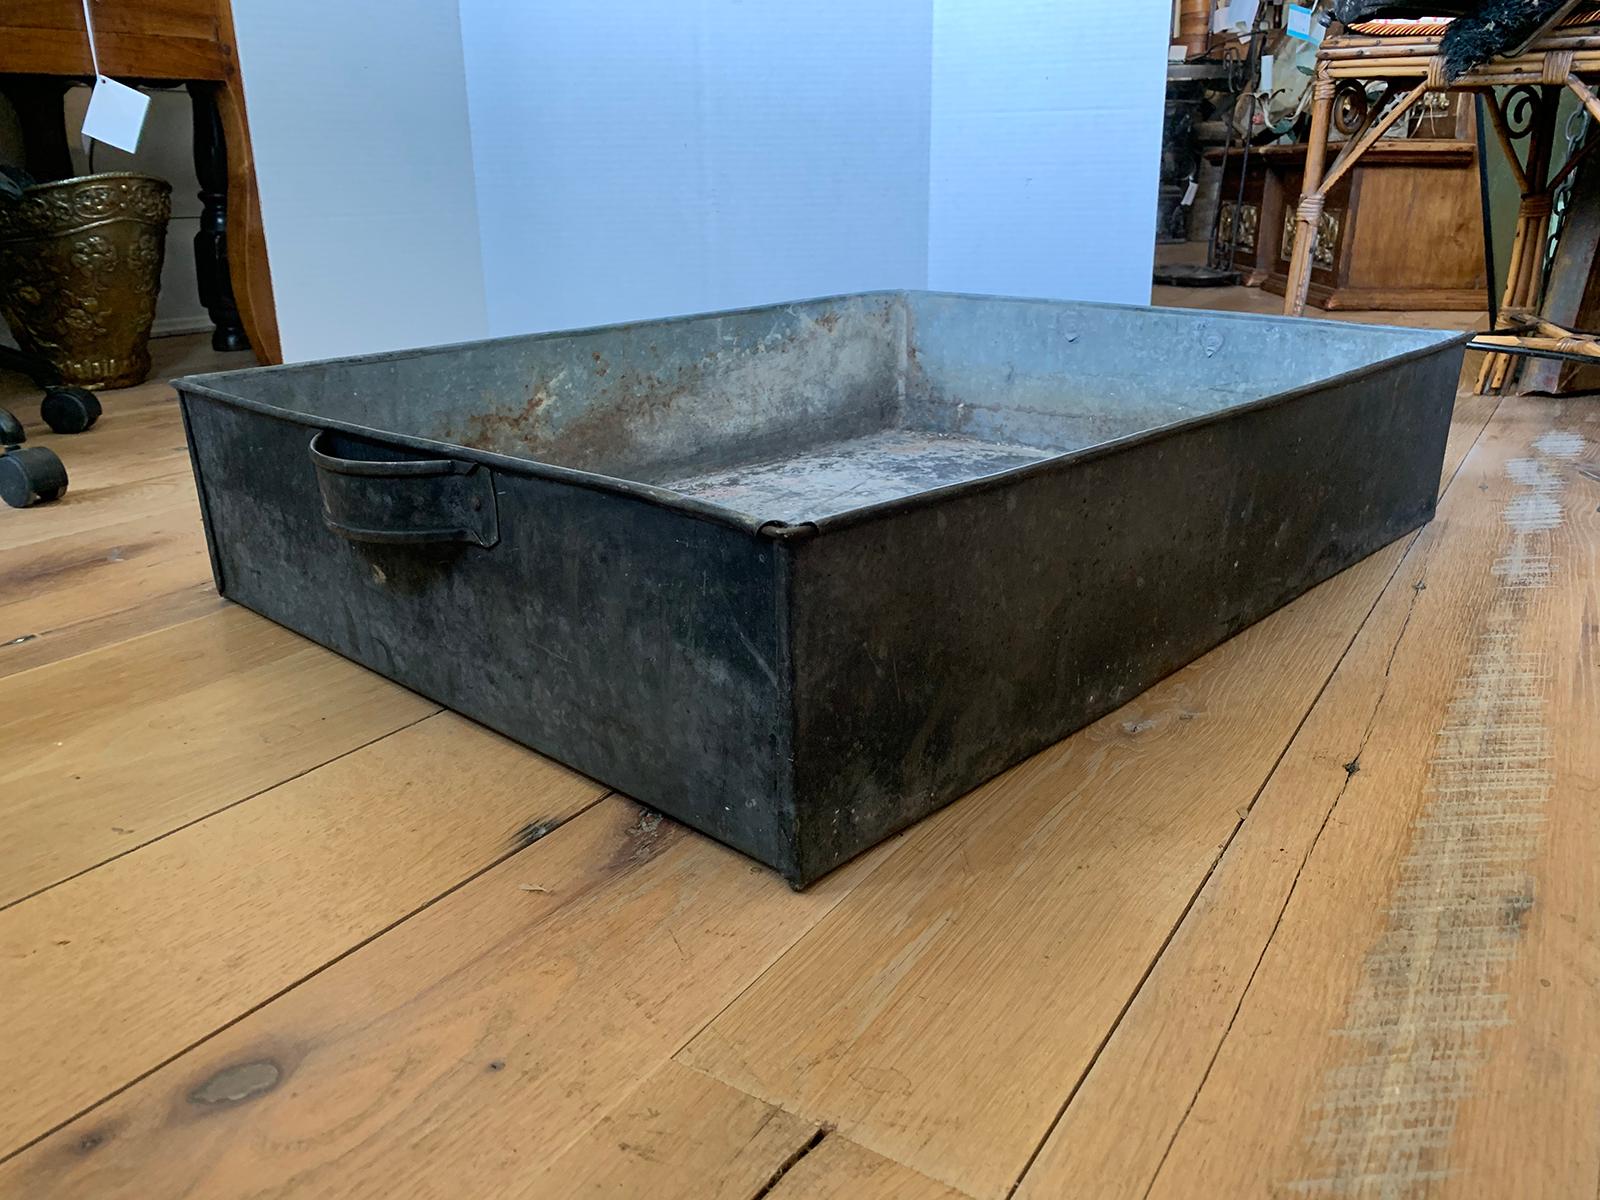 19th-early 20th century tole tray with handles, large scale.